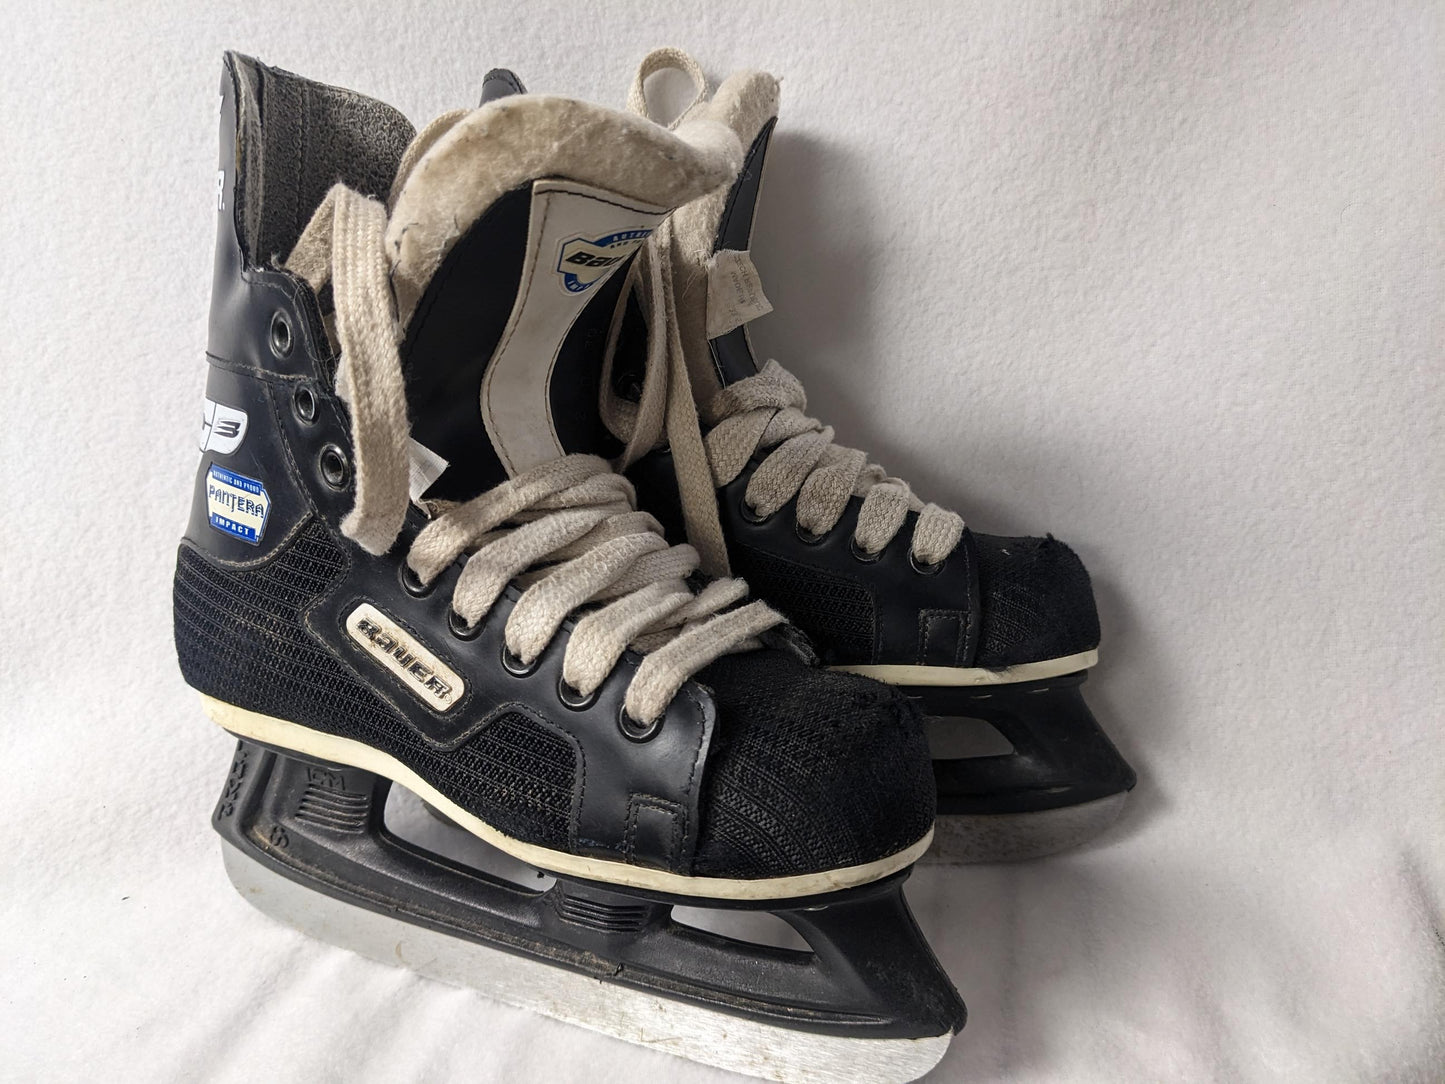 Bauer Pantera Impact Youth Hockey Ice Skates Size 2 Color Black Condition Used